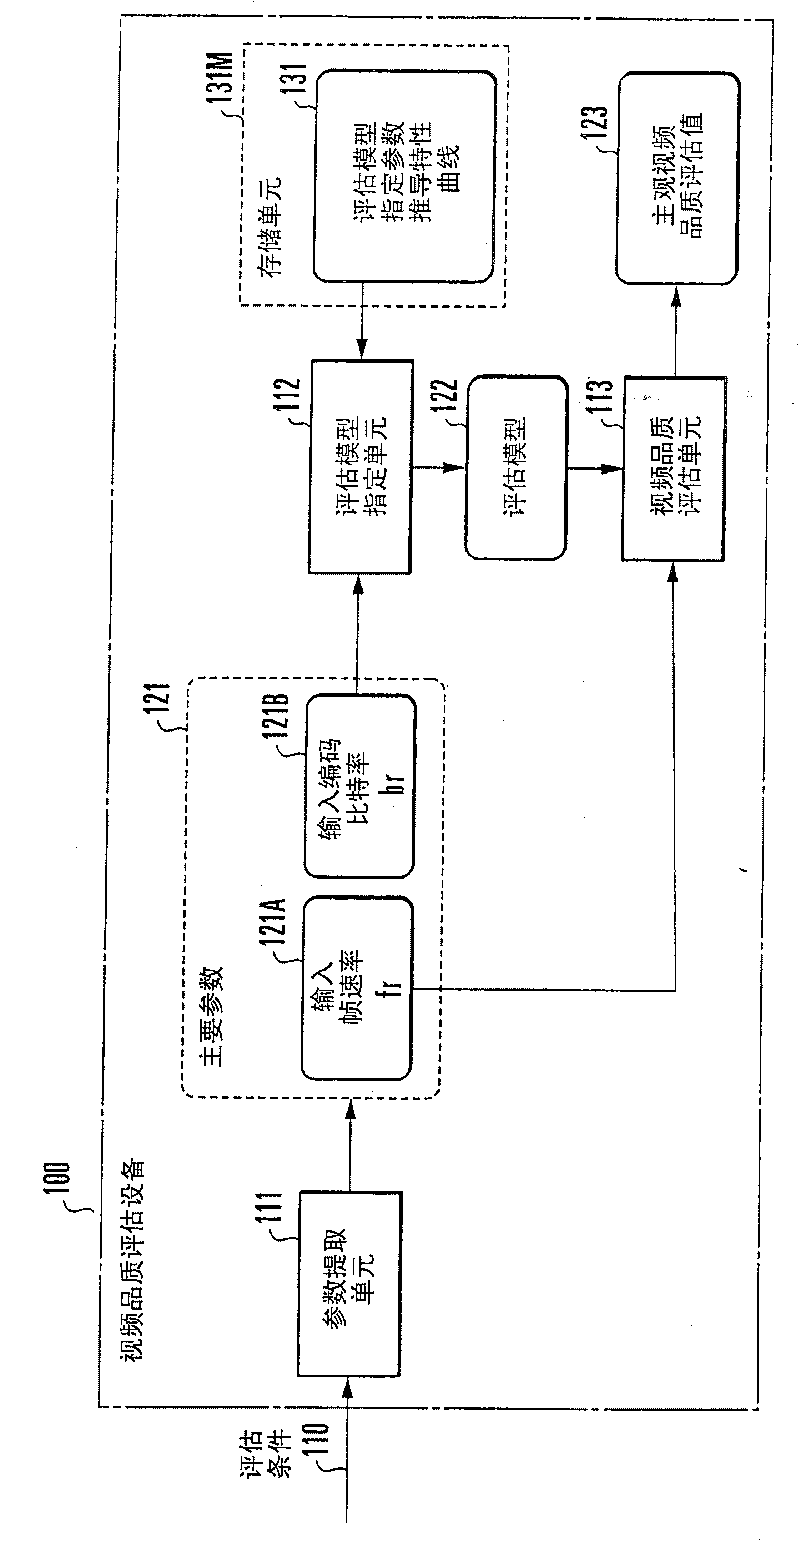 Video quality estimating device, method, and program